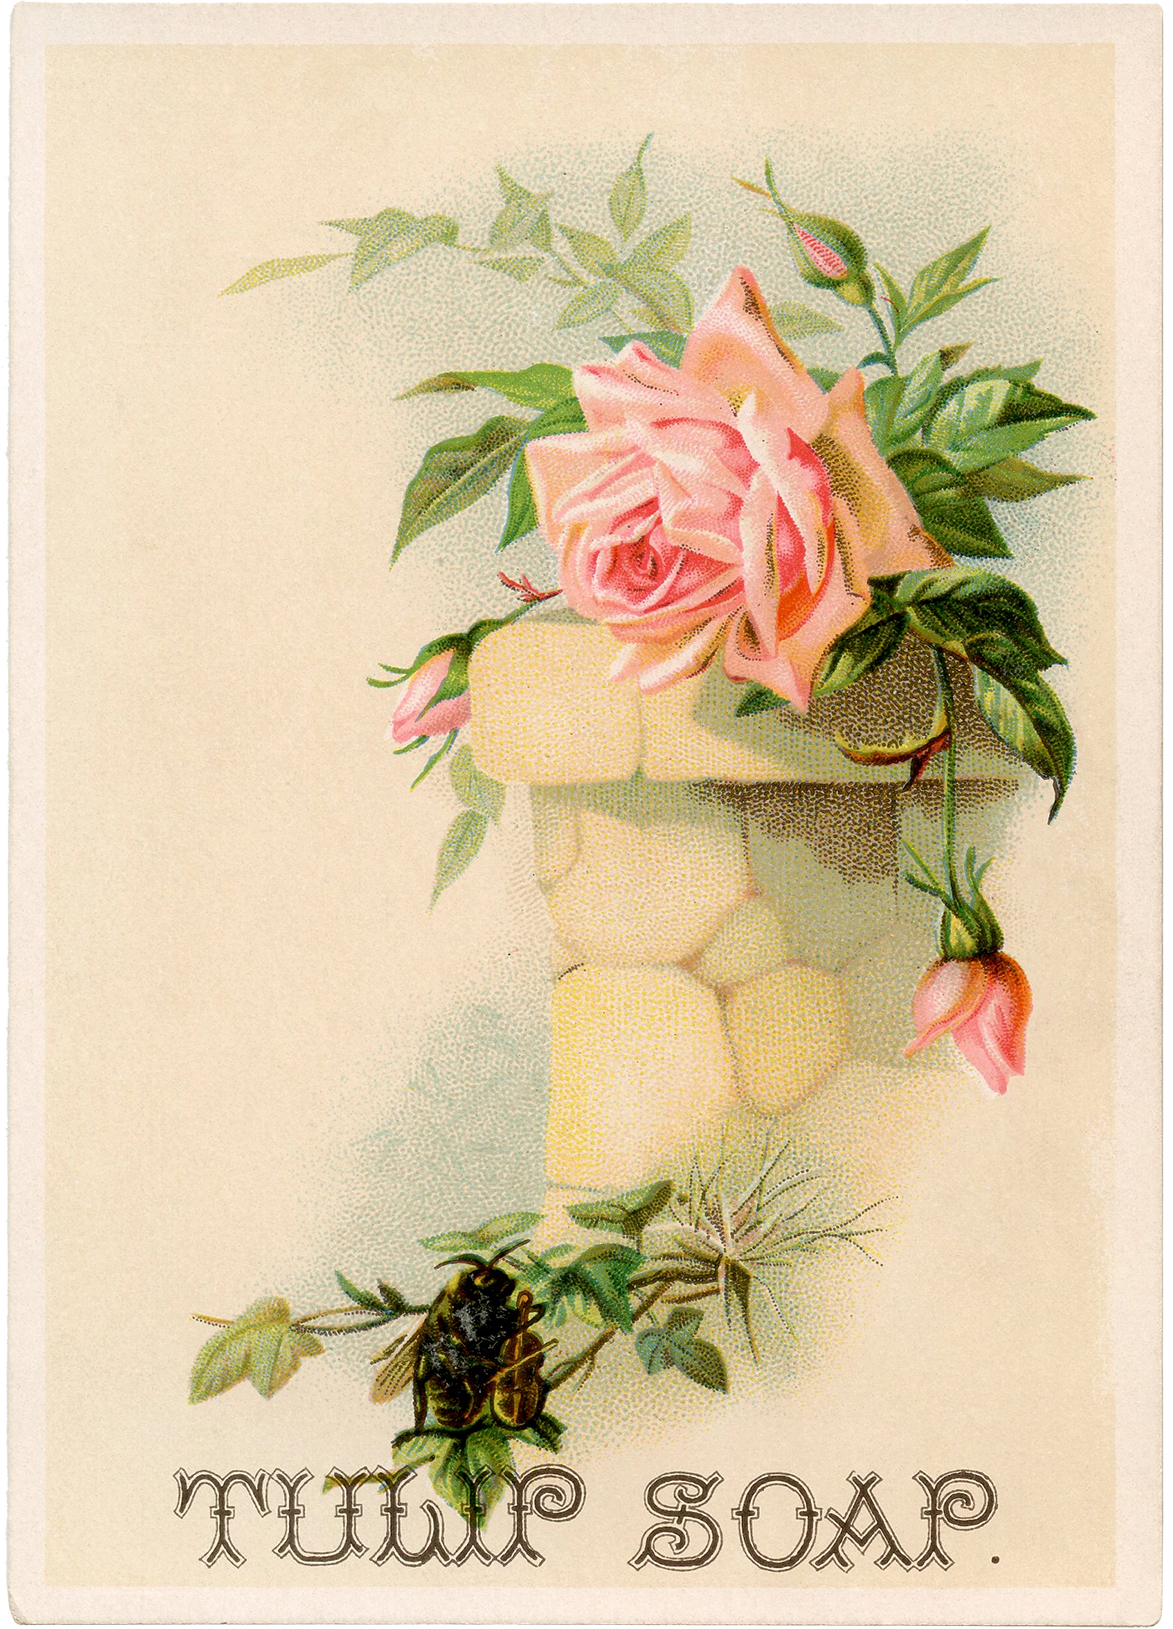 Vintage Soap Ad - Pink Roses! - The Graphics Fairy